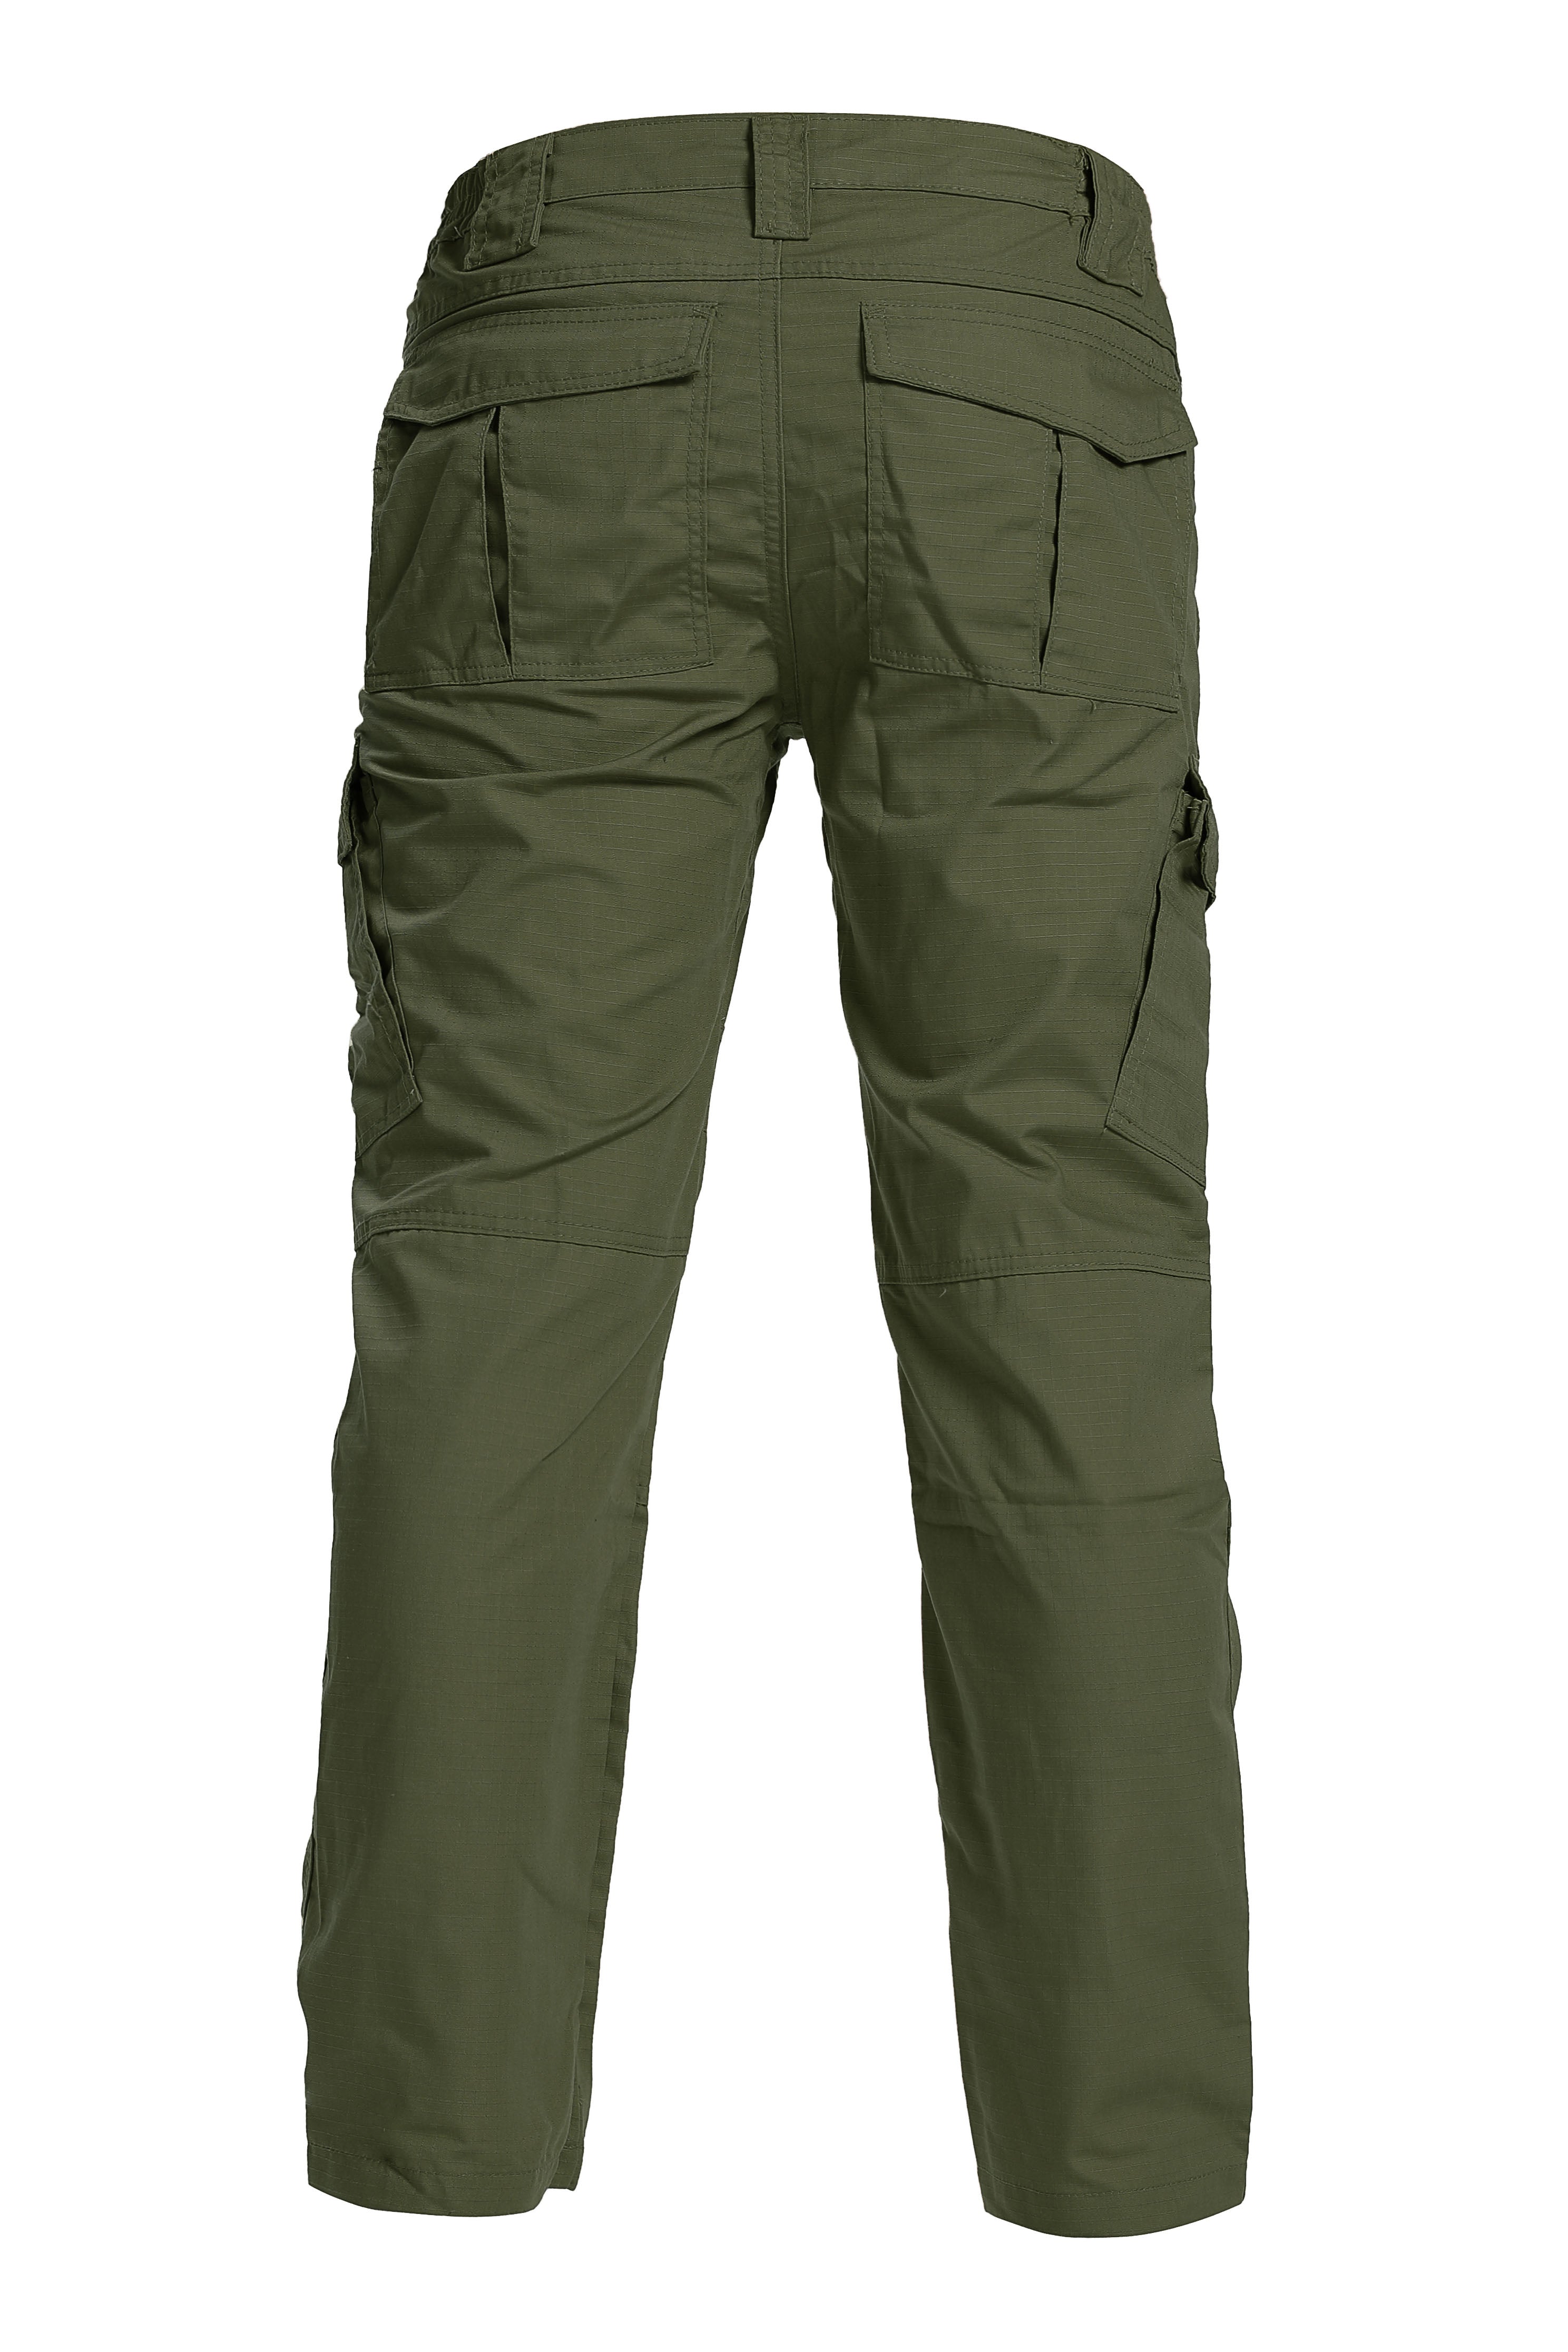 Men's Multi-Pockets Work Pants 100% Cotton Tactical Military Army Cargo  Pants